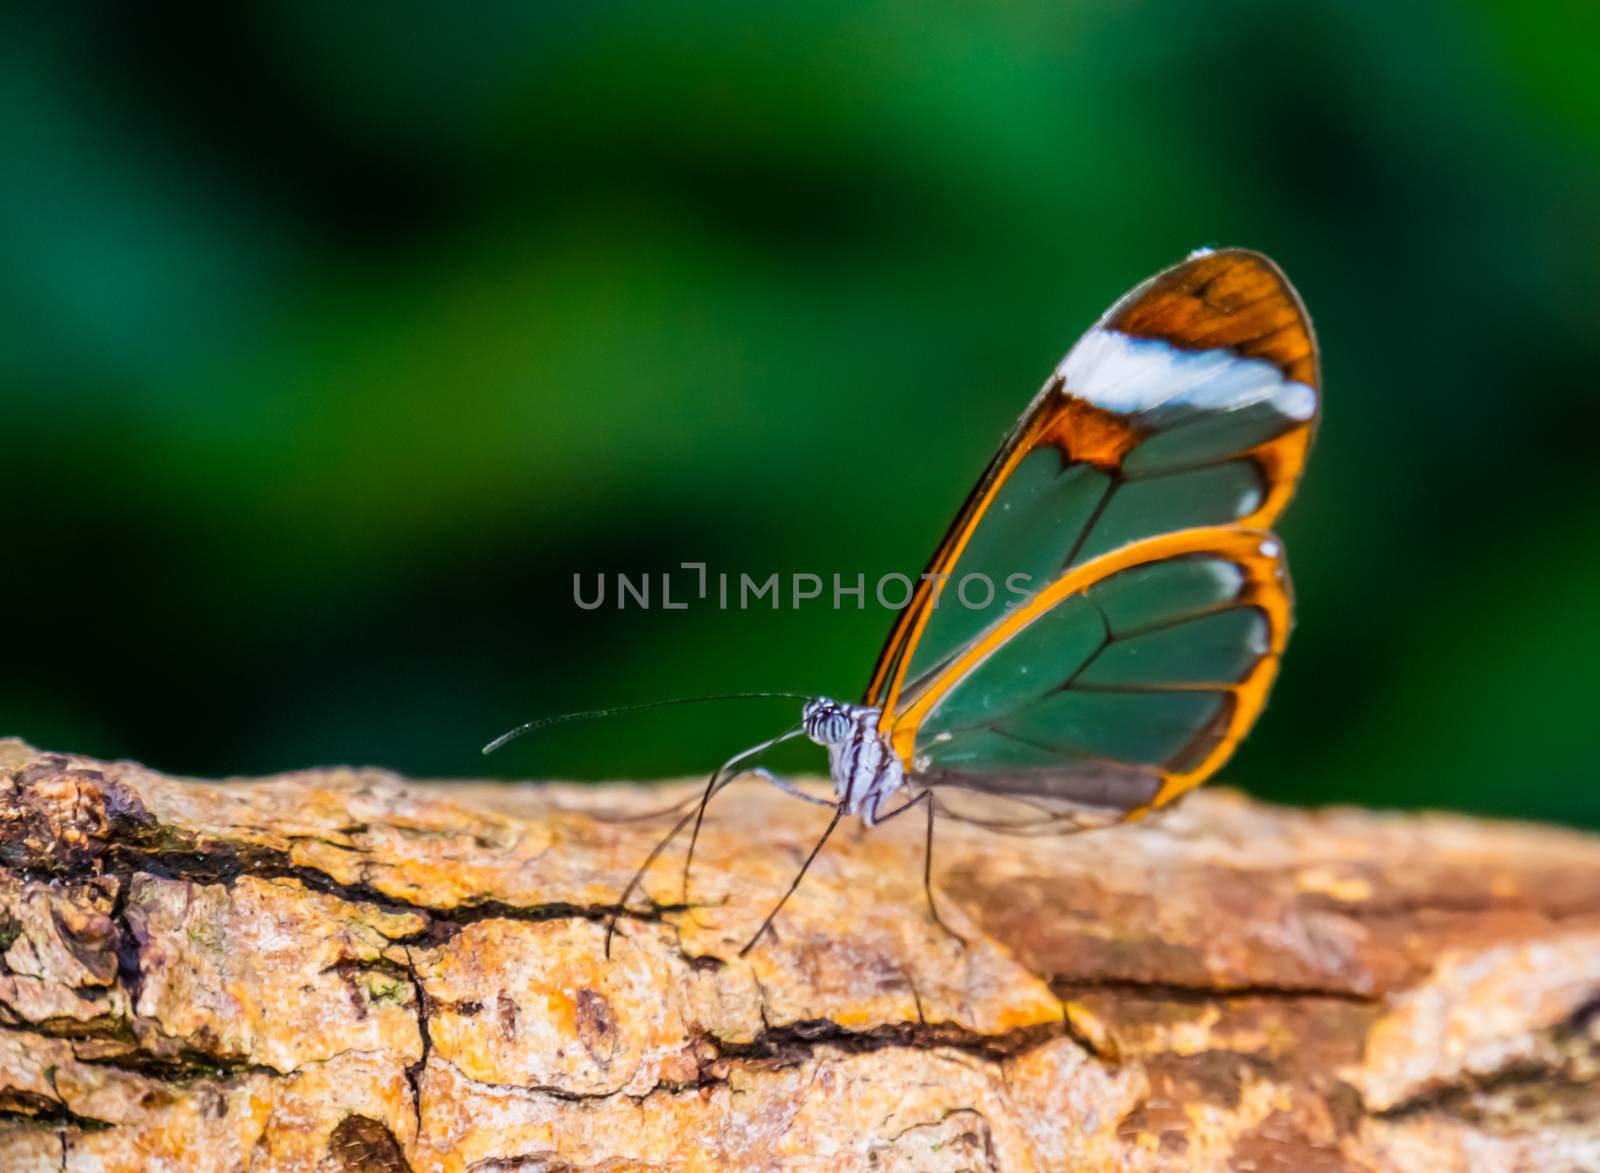 beautiful closeup of a glasswing butterfly, tropical insect specie from south America by charlottebleijenberg